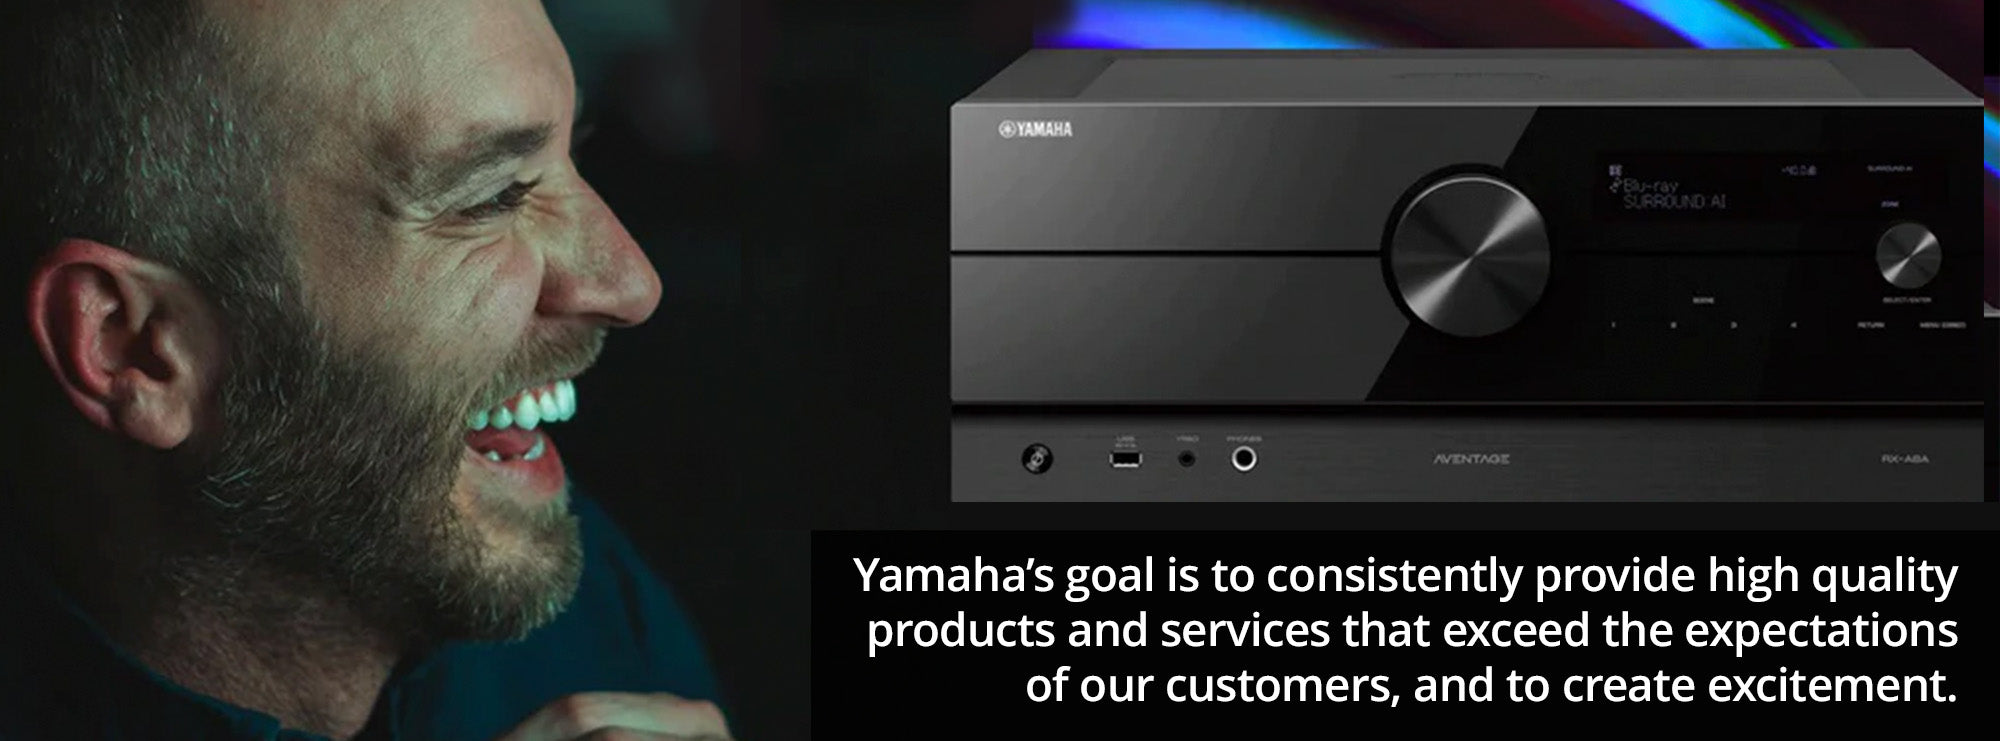 Yamaha’s goal is to consistently provide high quality products and services that exceed the expectations of our customers, and to create excitement.